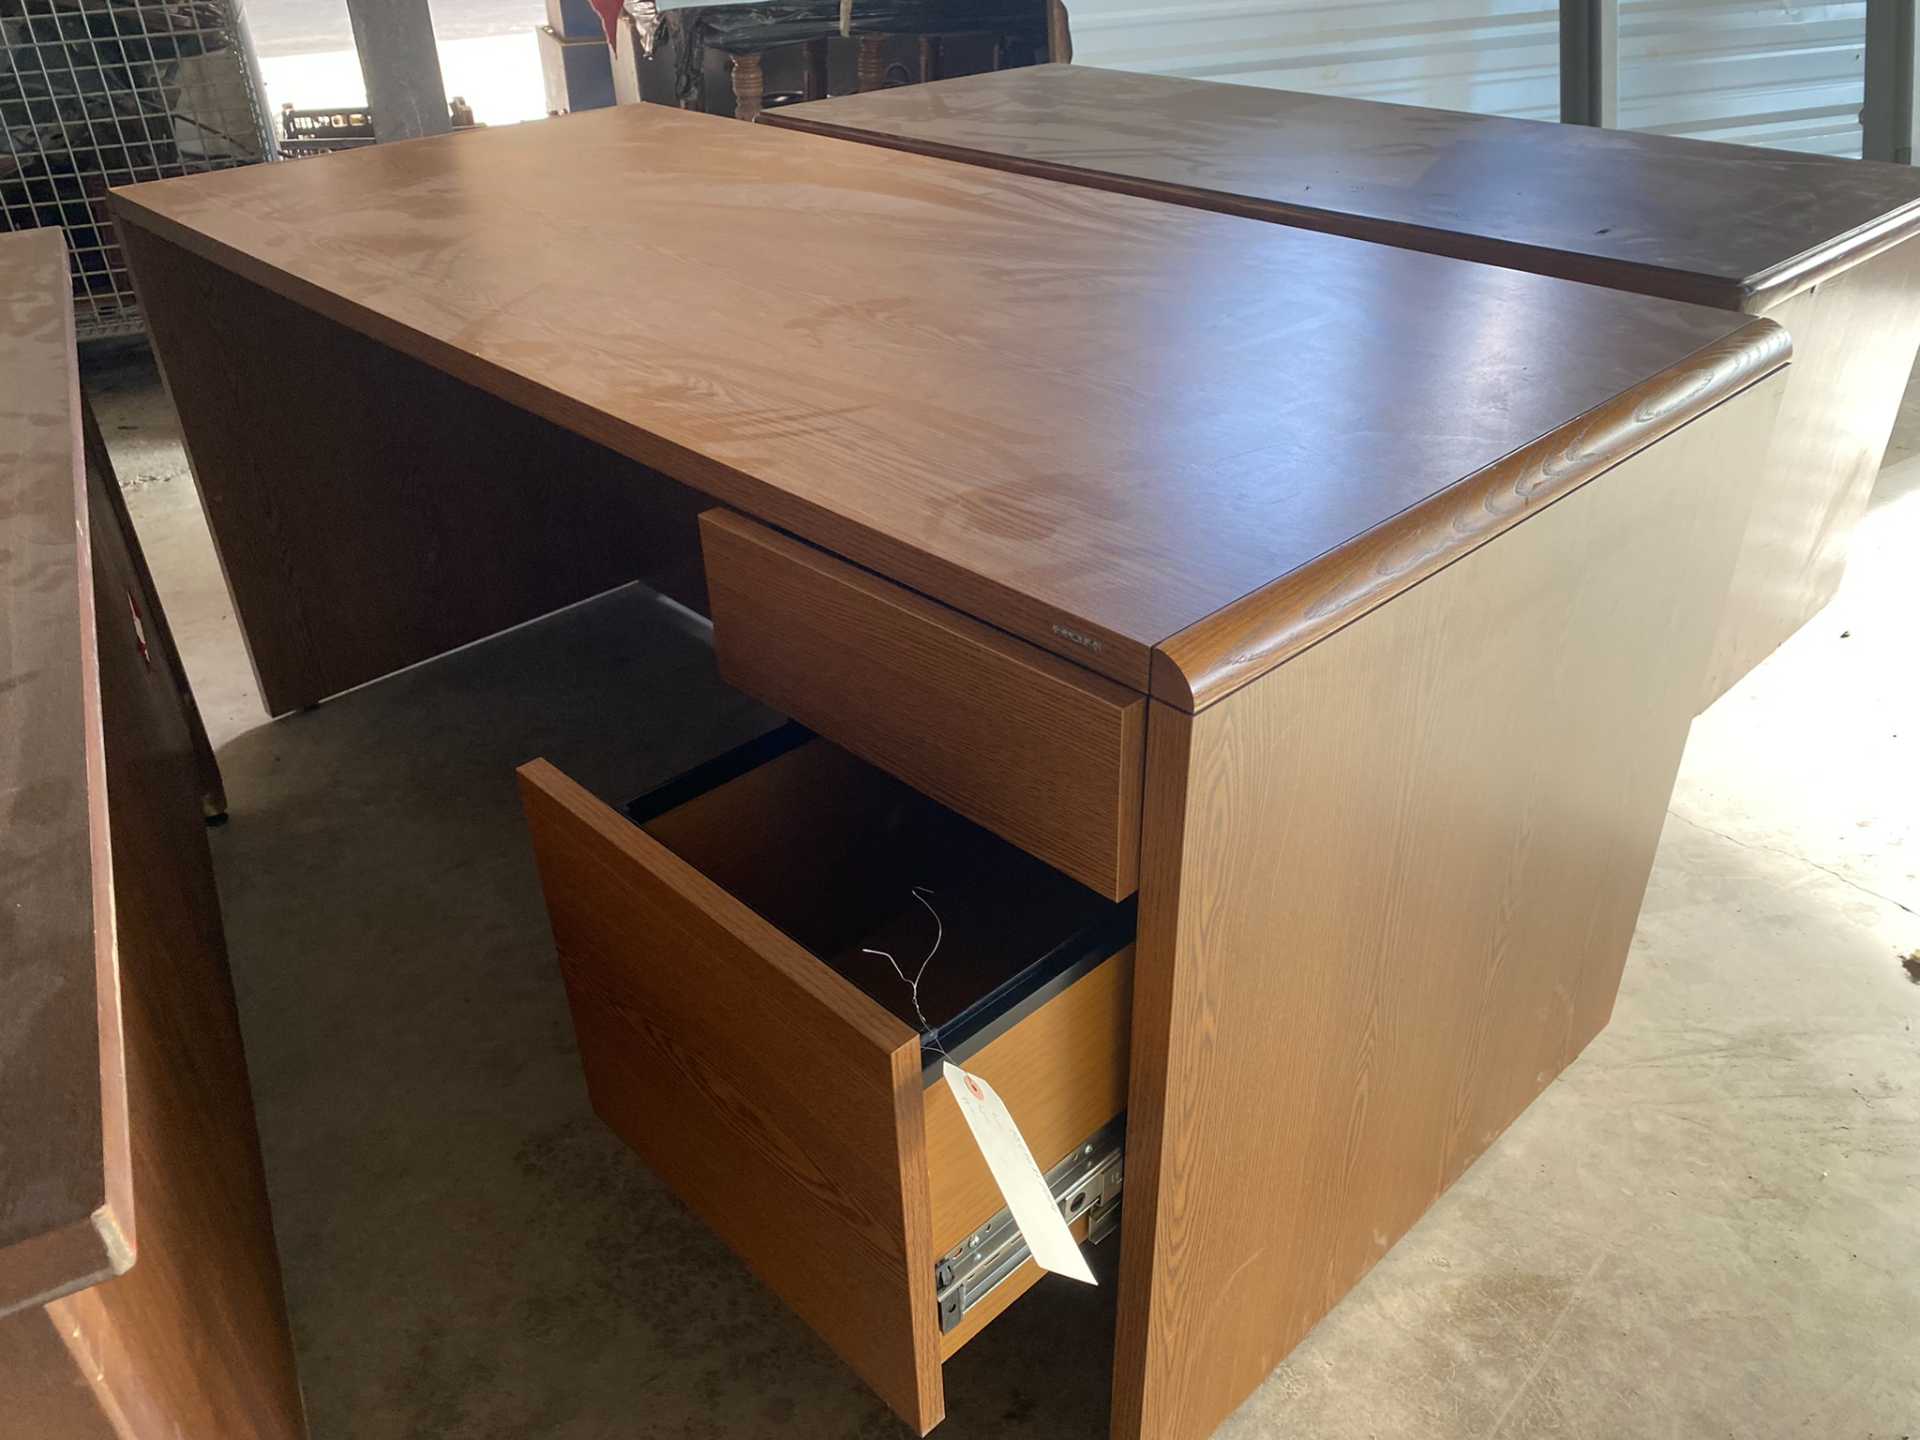 30 x 66” two drawers Pine Wood Desk